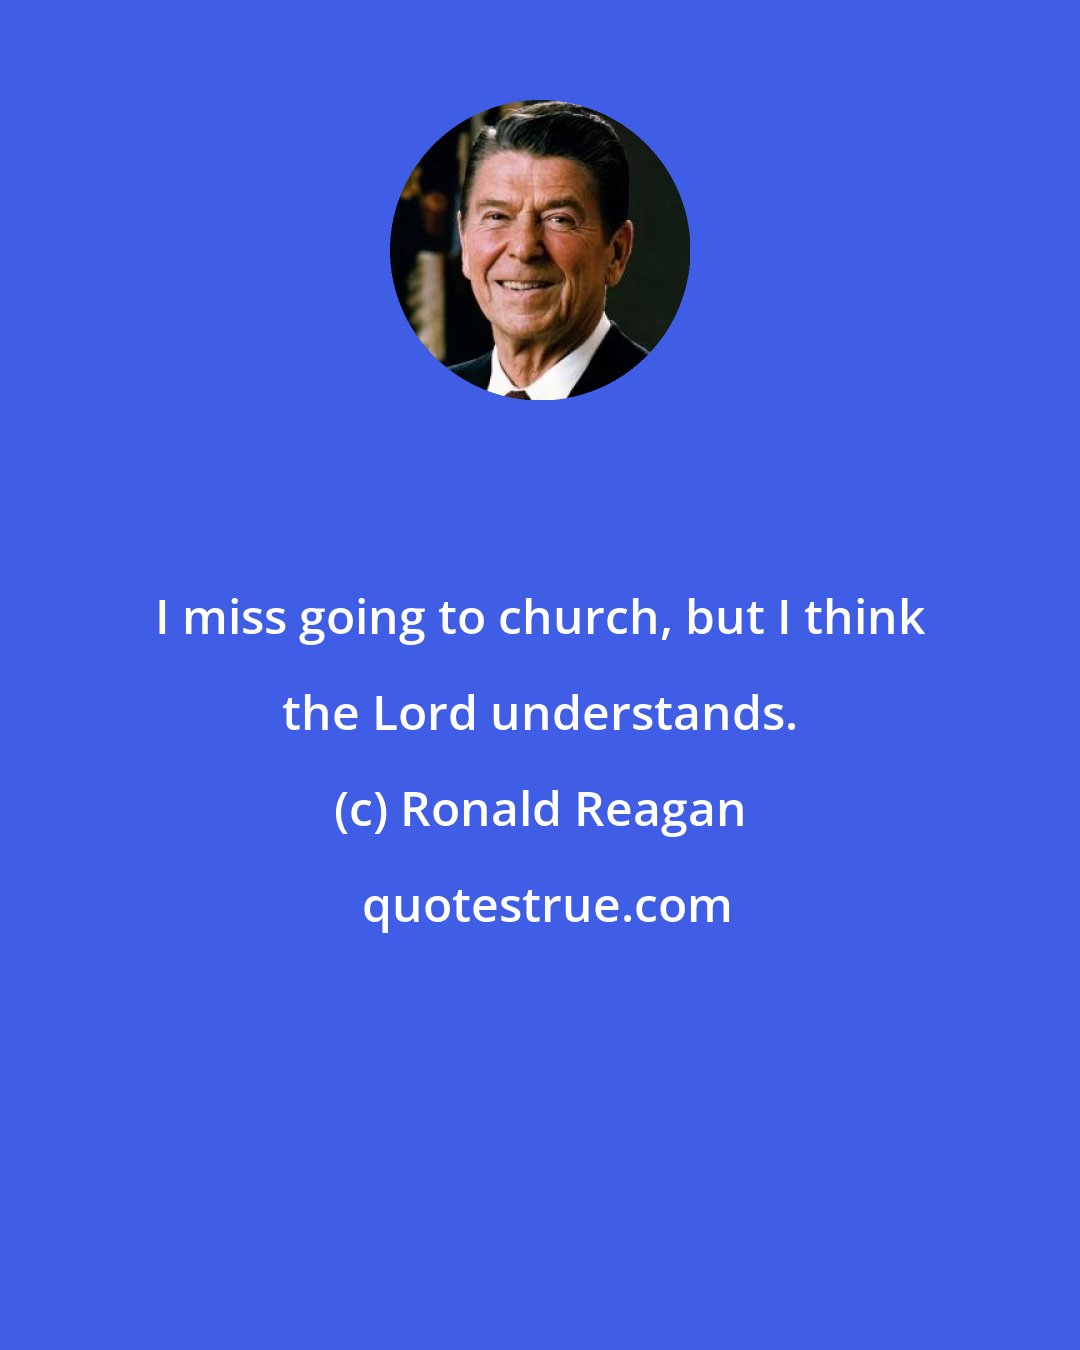 Ronald Reagan: I miss going to church, but I think the Lord understands.